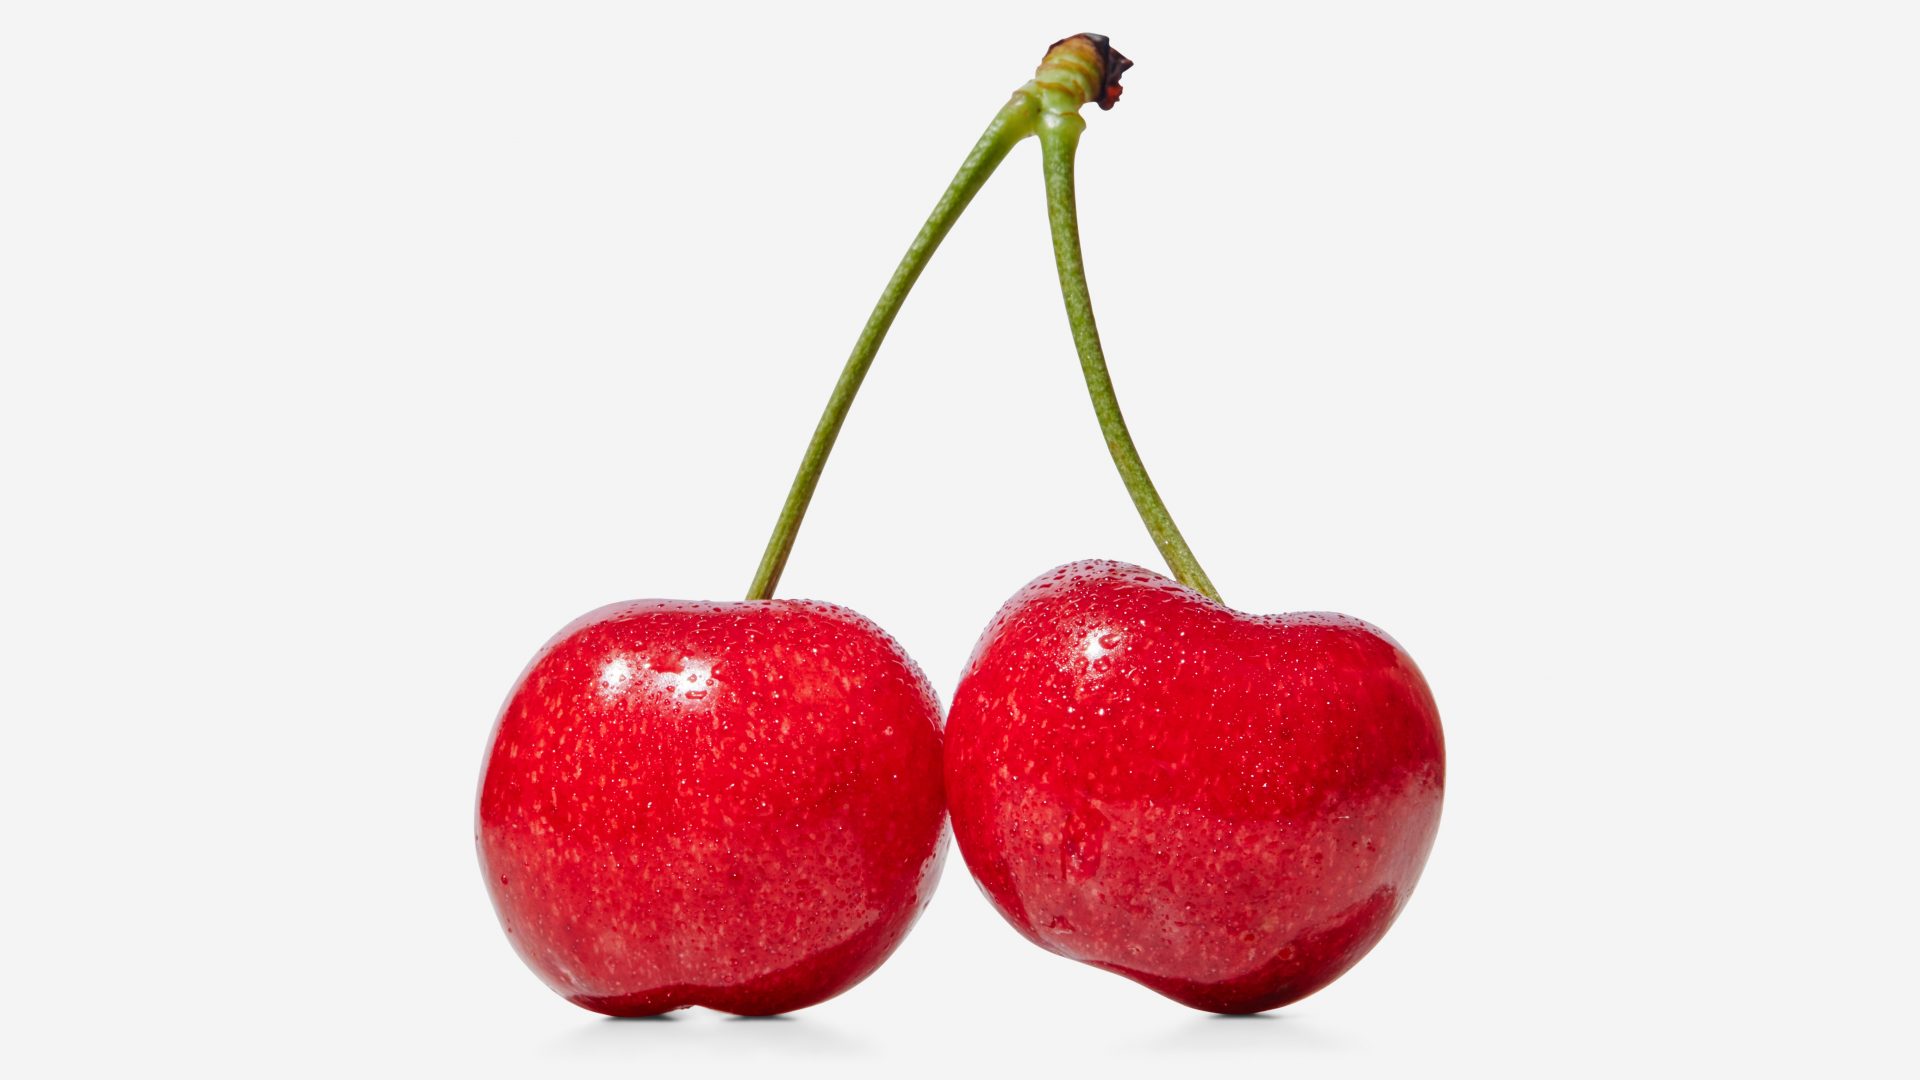 Can You Pit Cherries With out a Cherry Pitter?